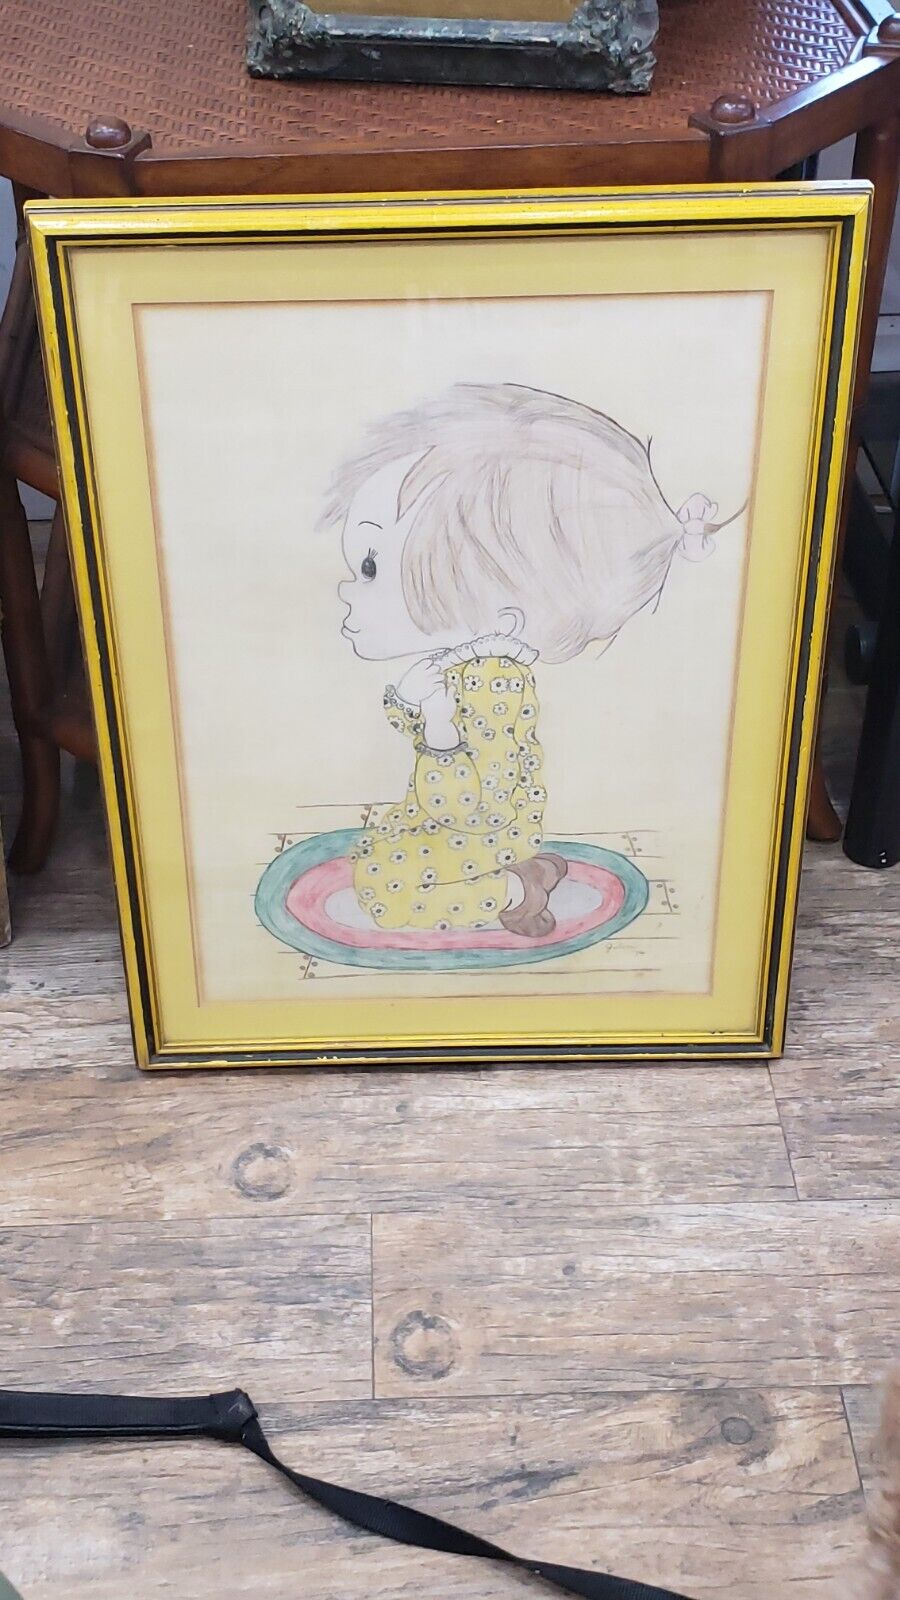 A Girl Praying, pencil/crayon on Paper Framed, signed 1974. A vintage art